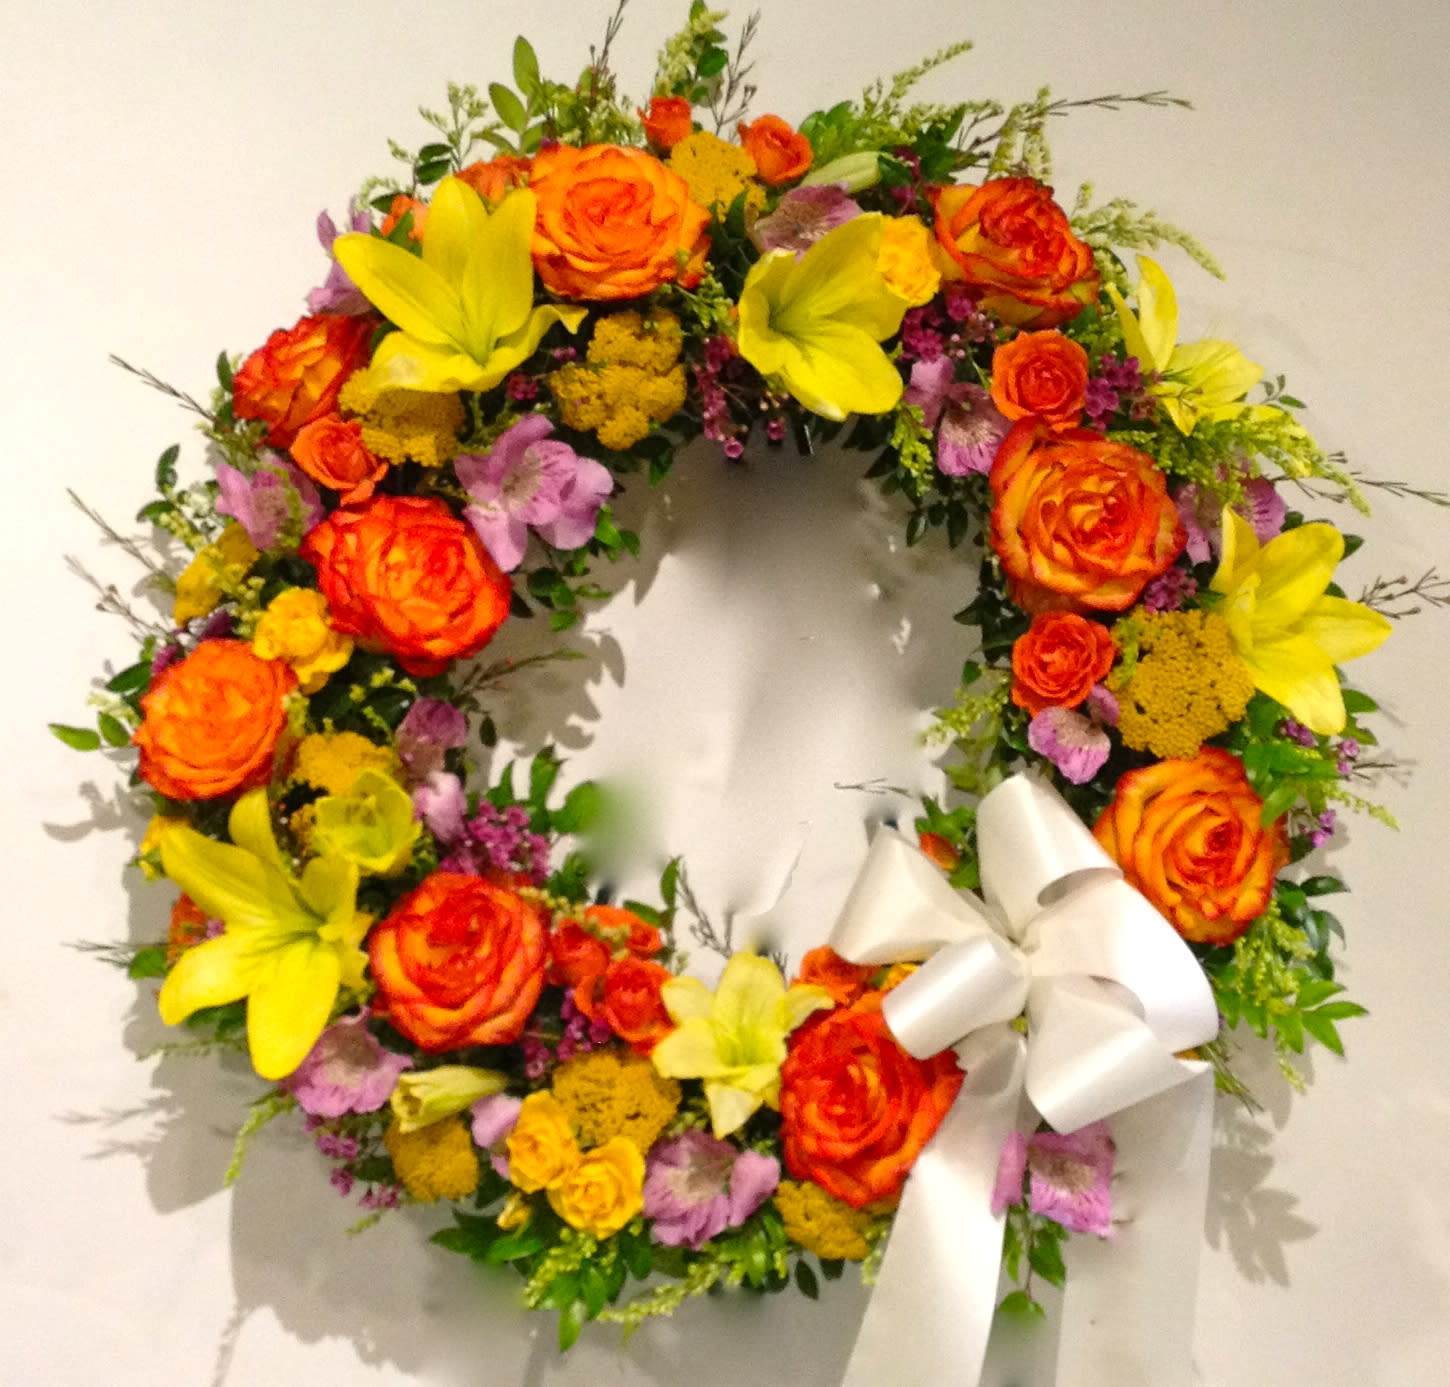 Bright Garden Wreath  - Memories of brighter days will offer solace and hope to the bereaved, as this vibrant multi-colored wreath expresses your caring and compassion during a time of mourning. This wreath includes vivid flowers such as roses, lilies, alstroemeria, solidago, yarrow and wax, all accented by lush greenery.